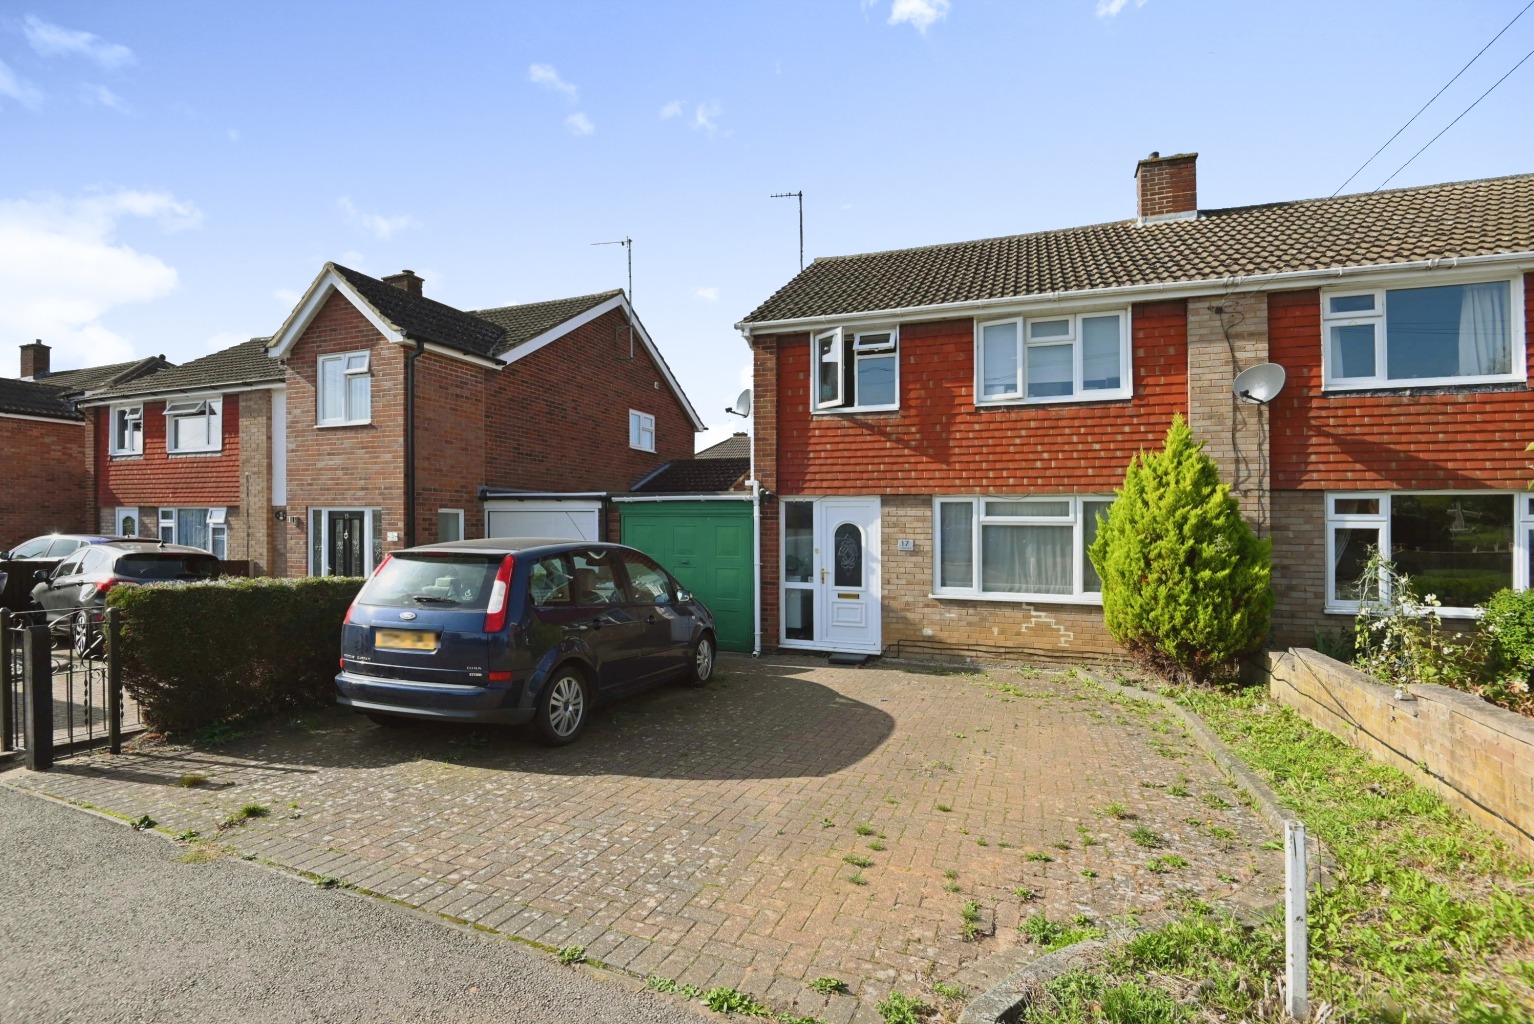 3 bed semi-detached house for sale in Longsands Road, St Neots - Property Image 1